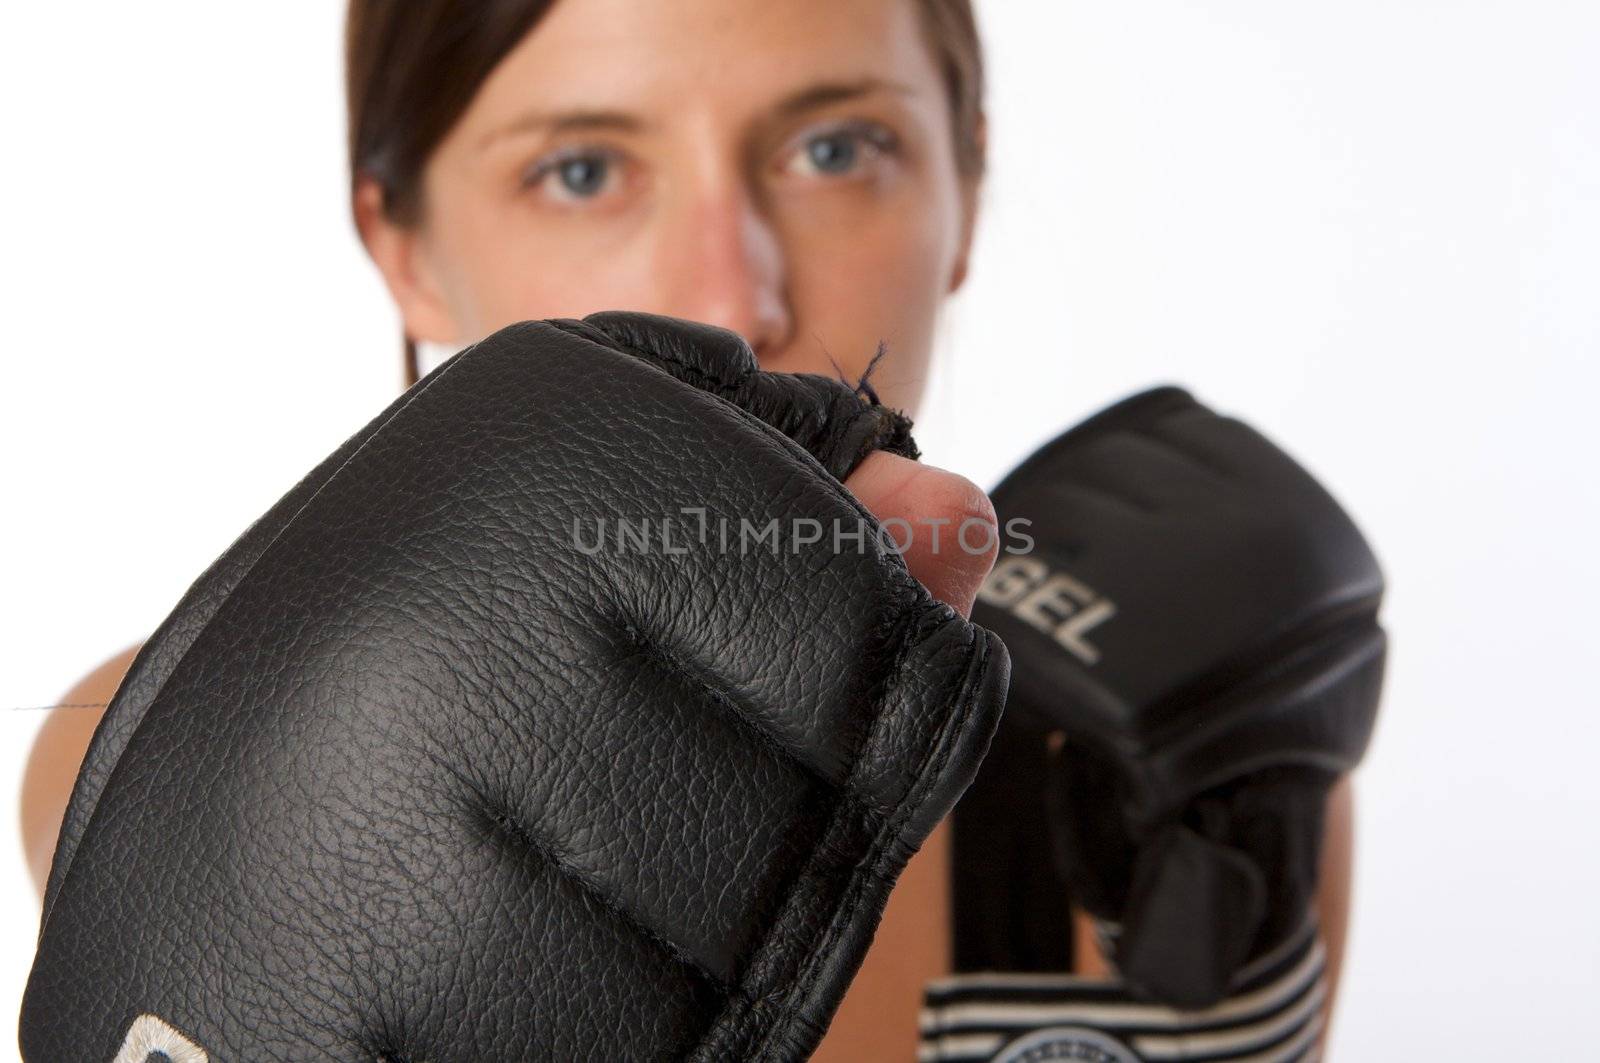 Woman boxer by Deimages